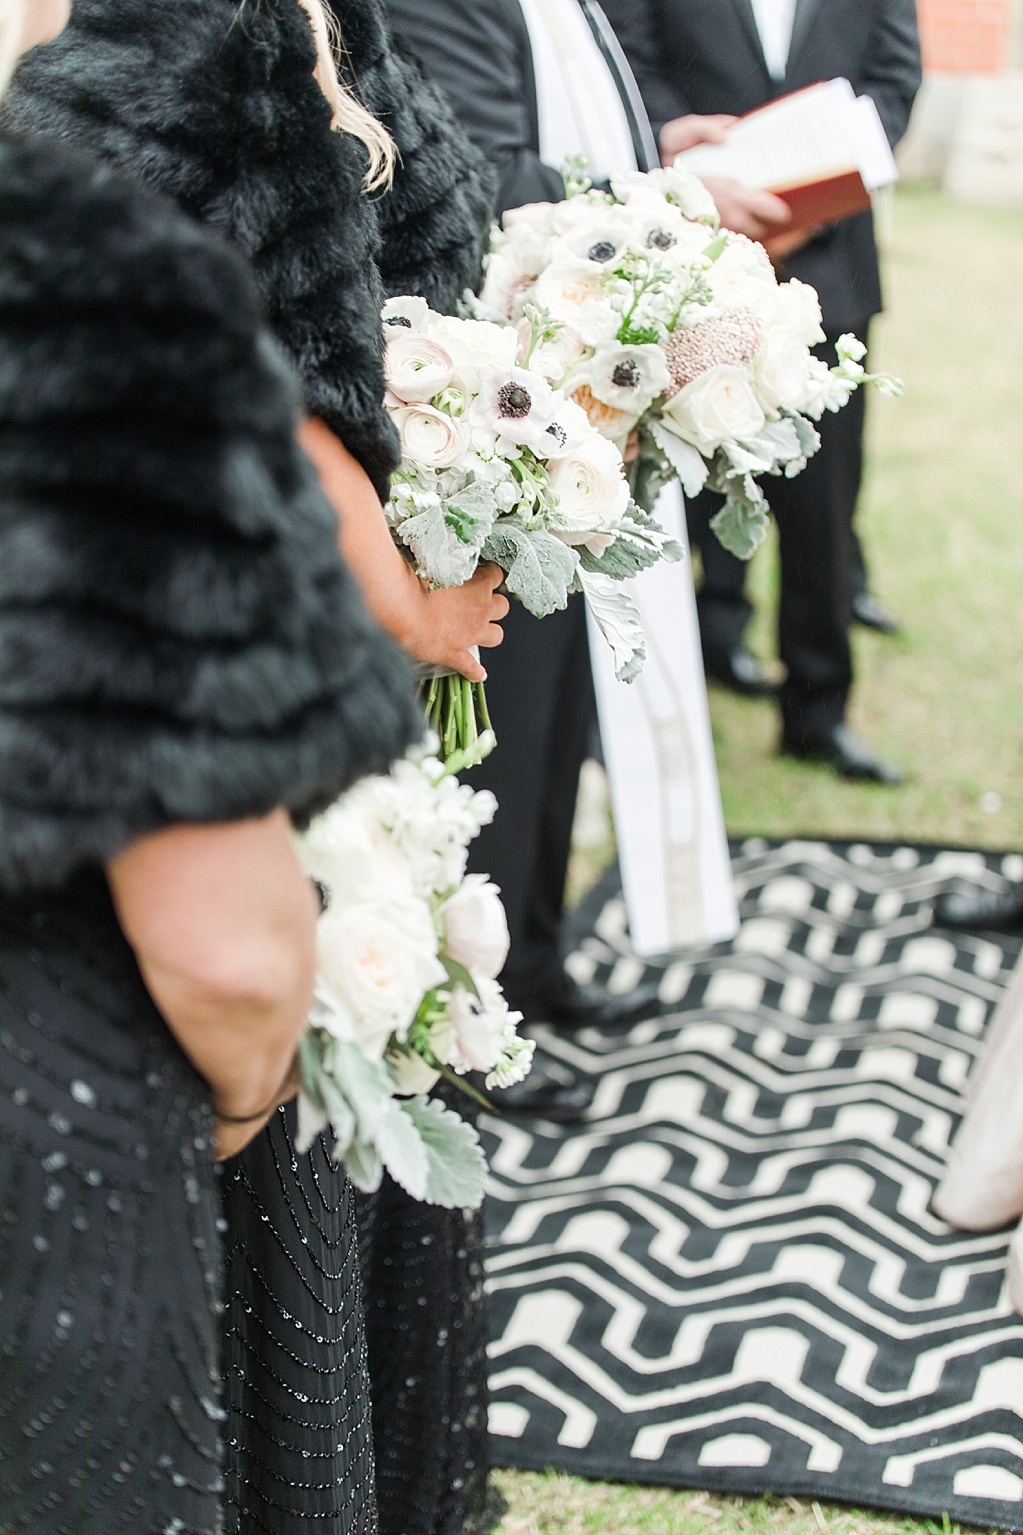 An Art Deco Black Tie Wedding at The Ingenhuett On High in Comfort Texas Featuring a Bentley Vintage Car and Blush Wedding Dress 0077